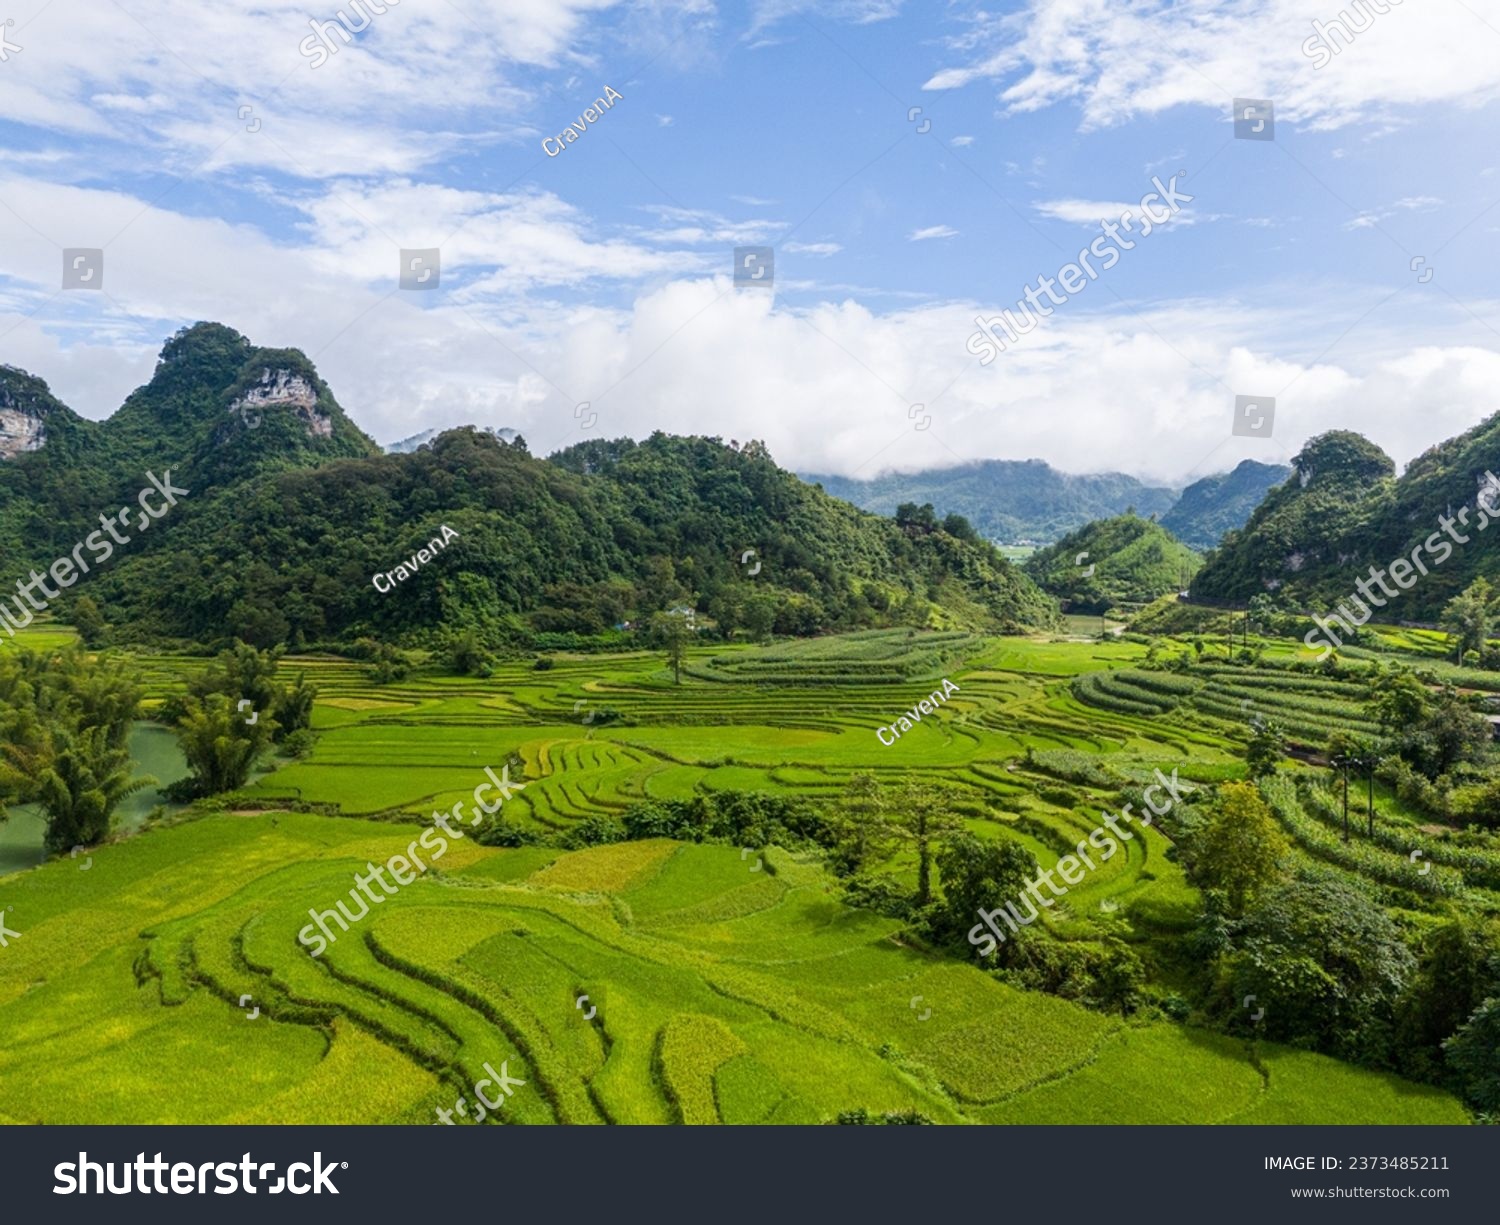 Aerial landscape in Quay Son river, Trung Khanh, Cao Bang, Vietnam with nature, green rice fields and rustic indigenous houses. Travel and landscape concept. #2373485211